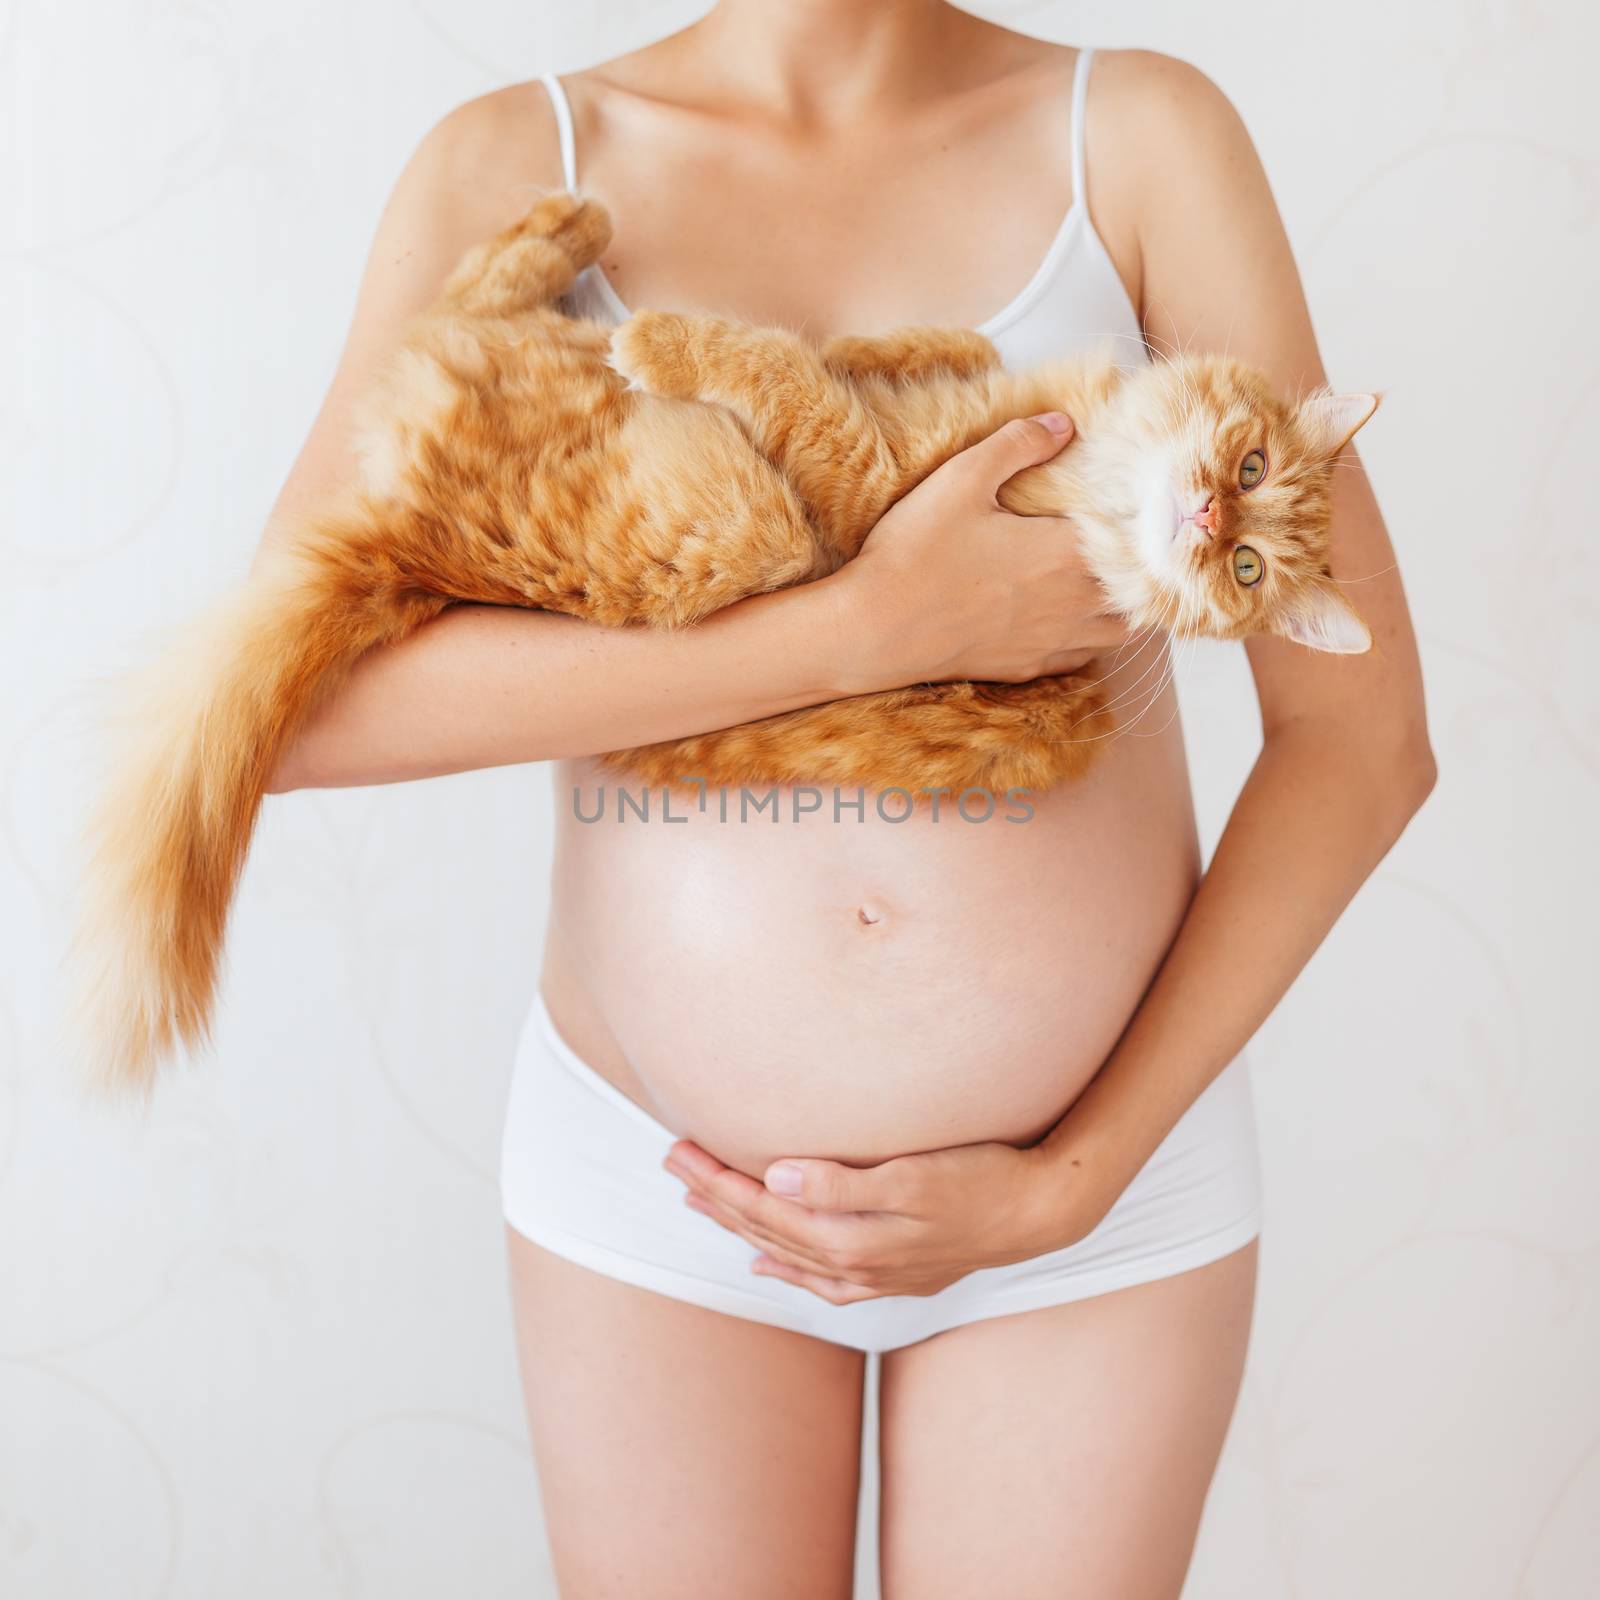 Pregnant woman in white underwear with cute ginger cat. Young woman expecting a baby. Risk of infection toxoplasmosis. by aksenovko